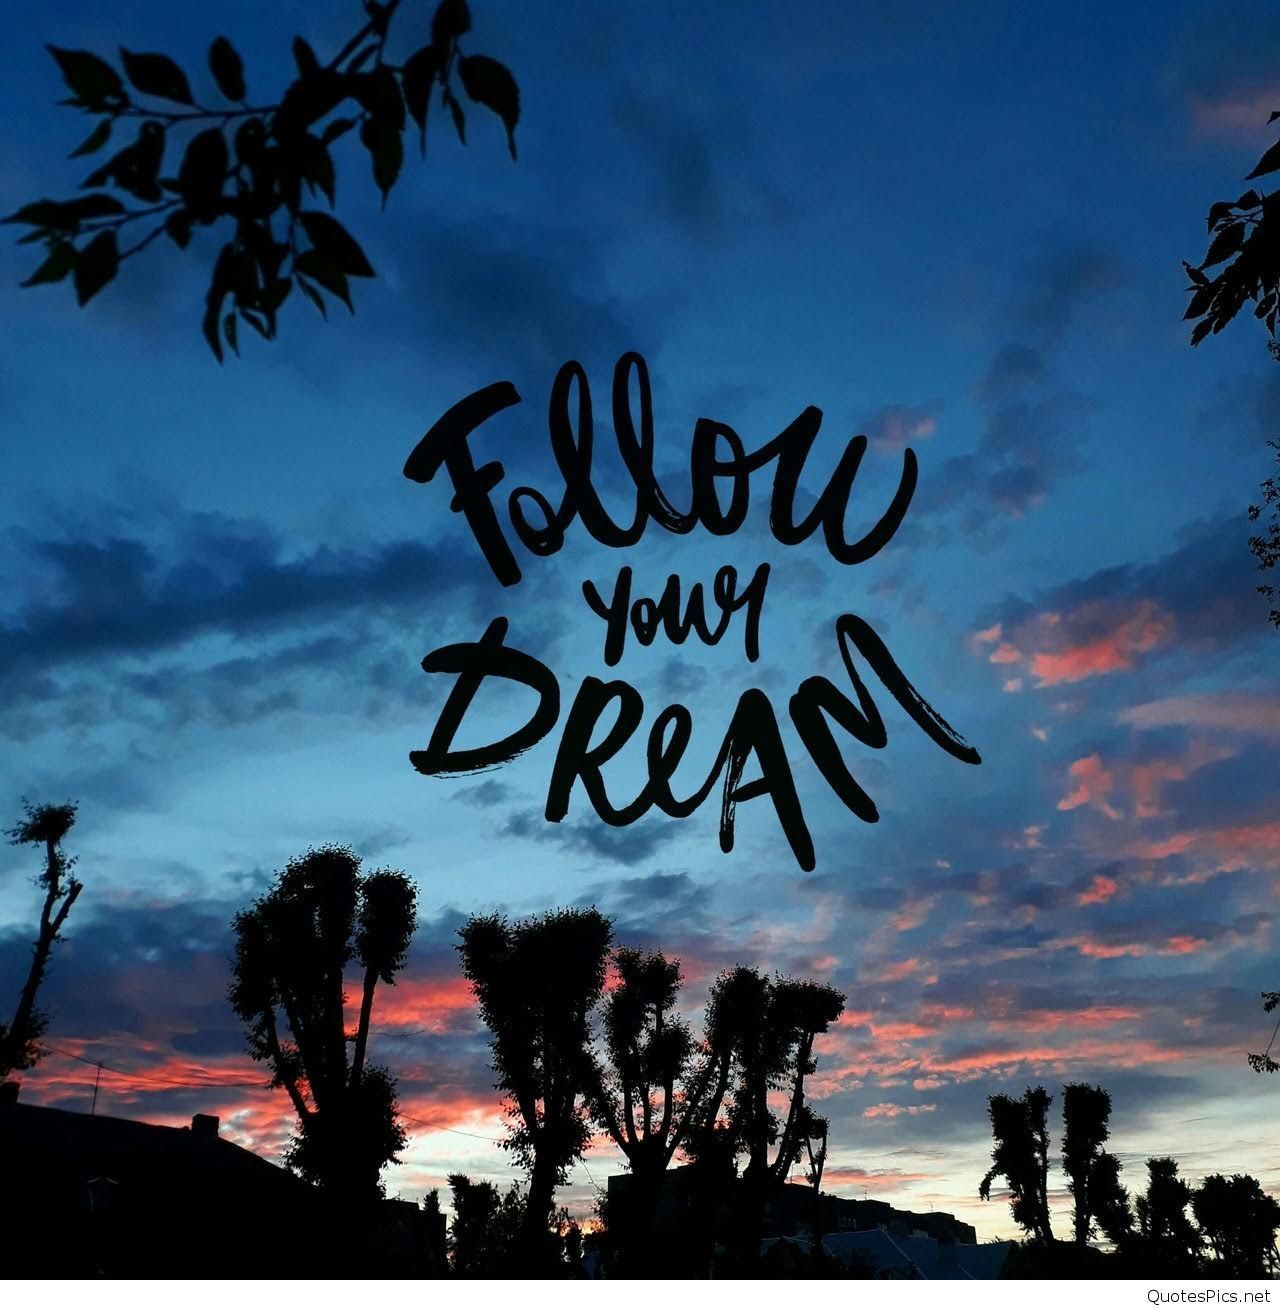 Follow Your Dreams Wallpapers